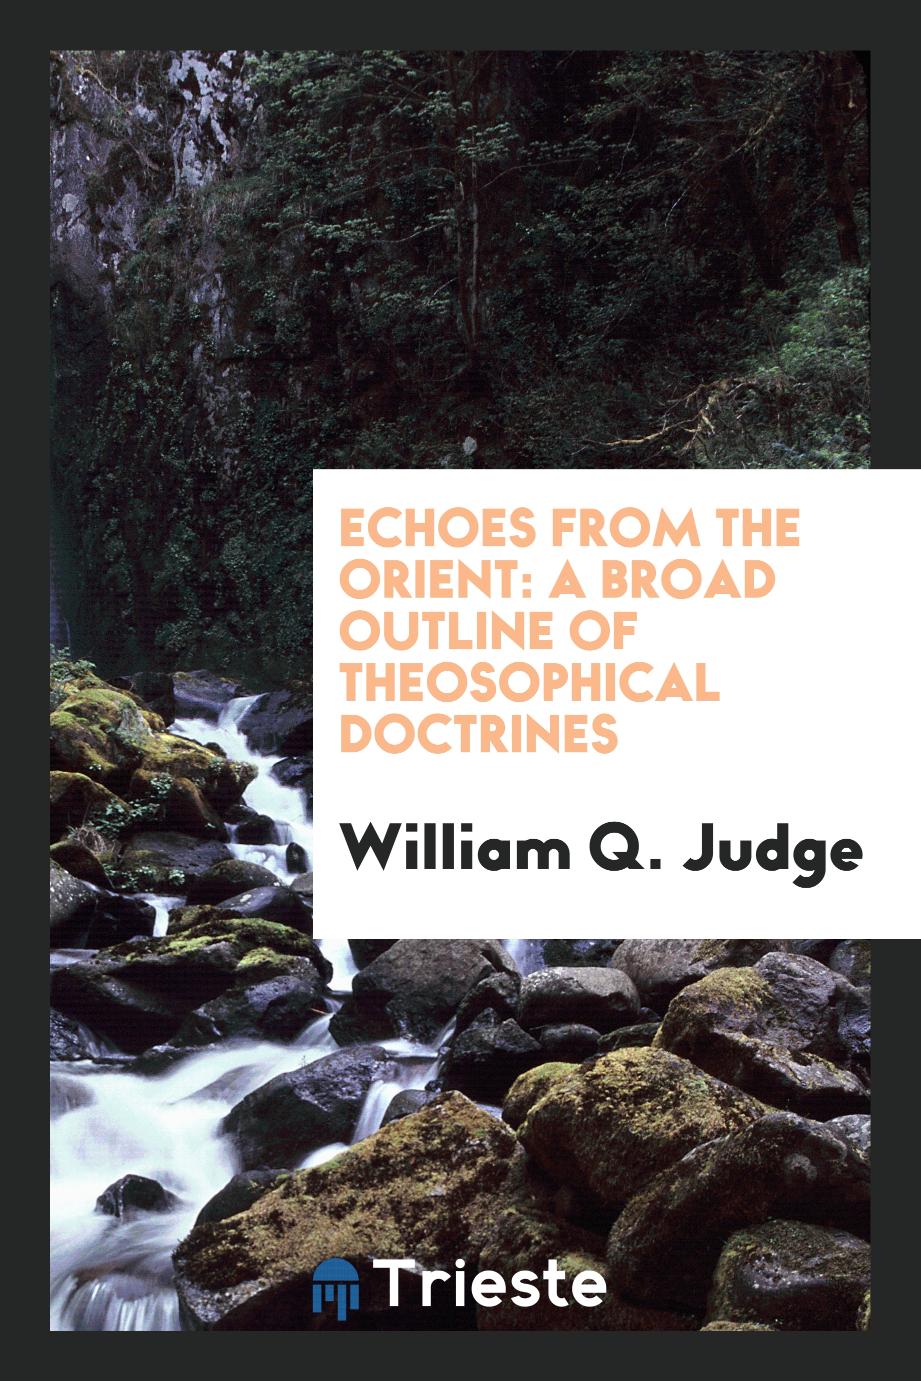 Echoes from the Orient: a broad outline of theosophical doctrines